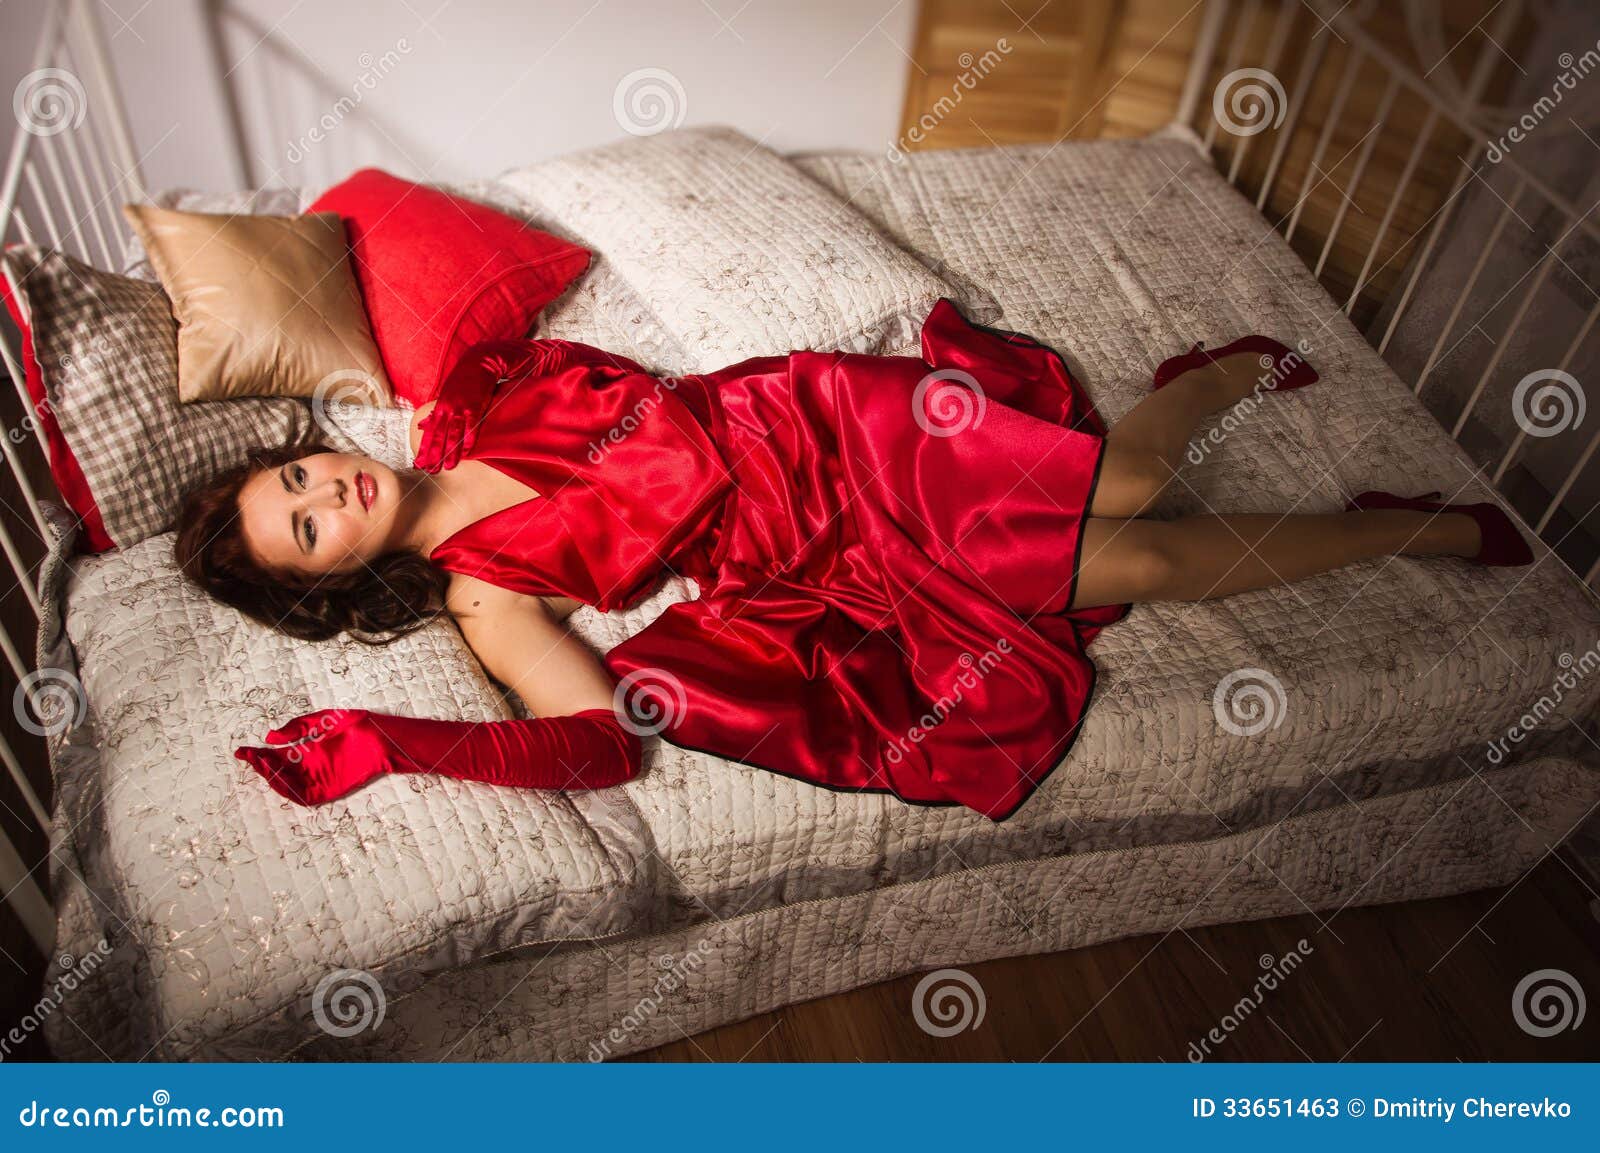 Sensual Brunette In A Red Dress Lying On The Bed Stock Image Image Of Adult Chamber 33651463 